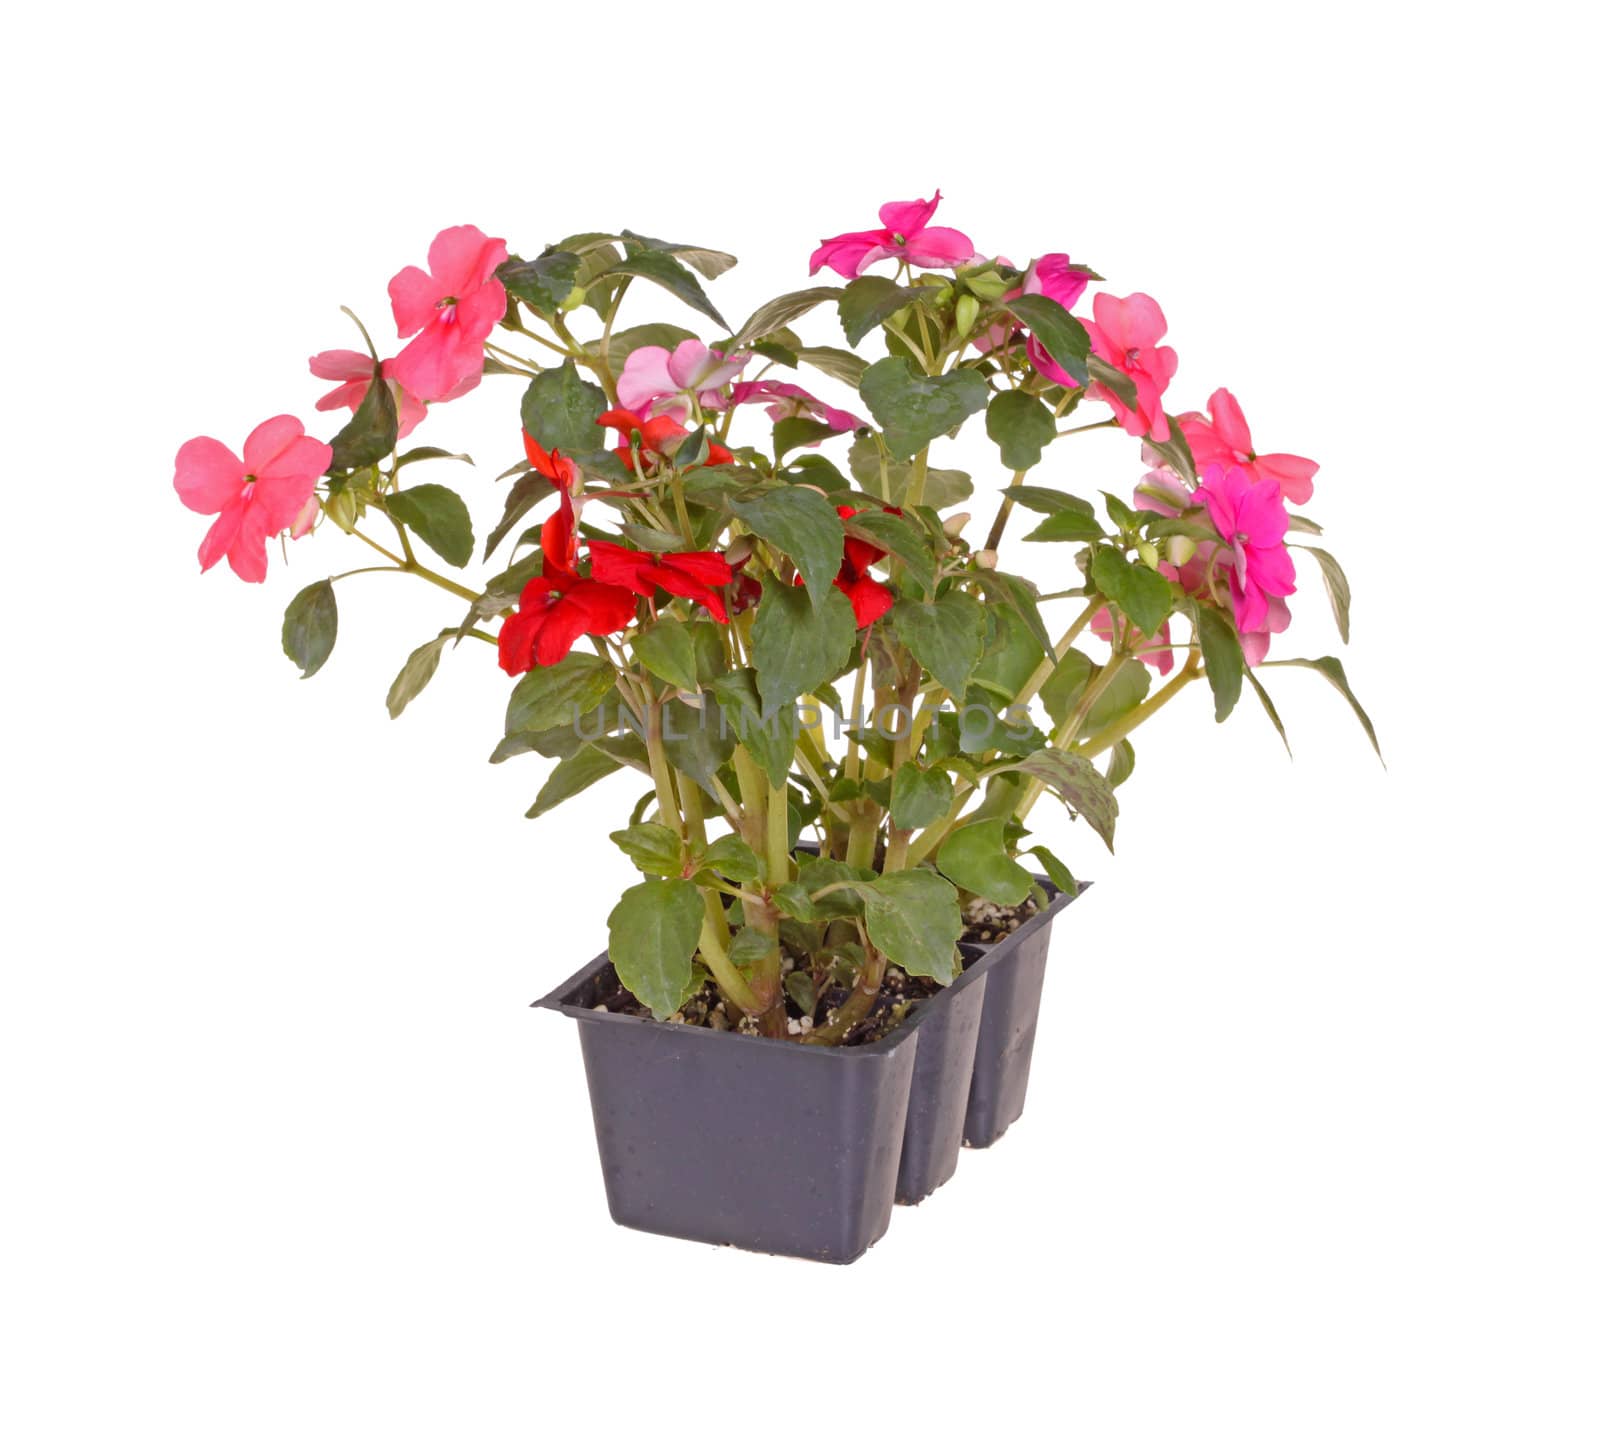 Pack containing three seedlings of impatiens plants (Impatiens wallerana) flowering in pink and red ready for transplanting into a home garden isolated against a white background